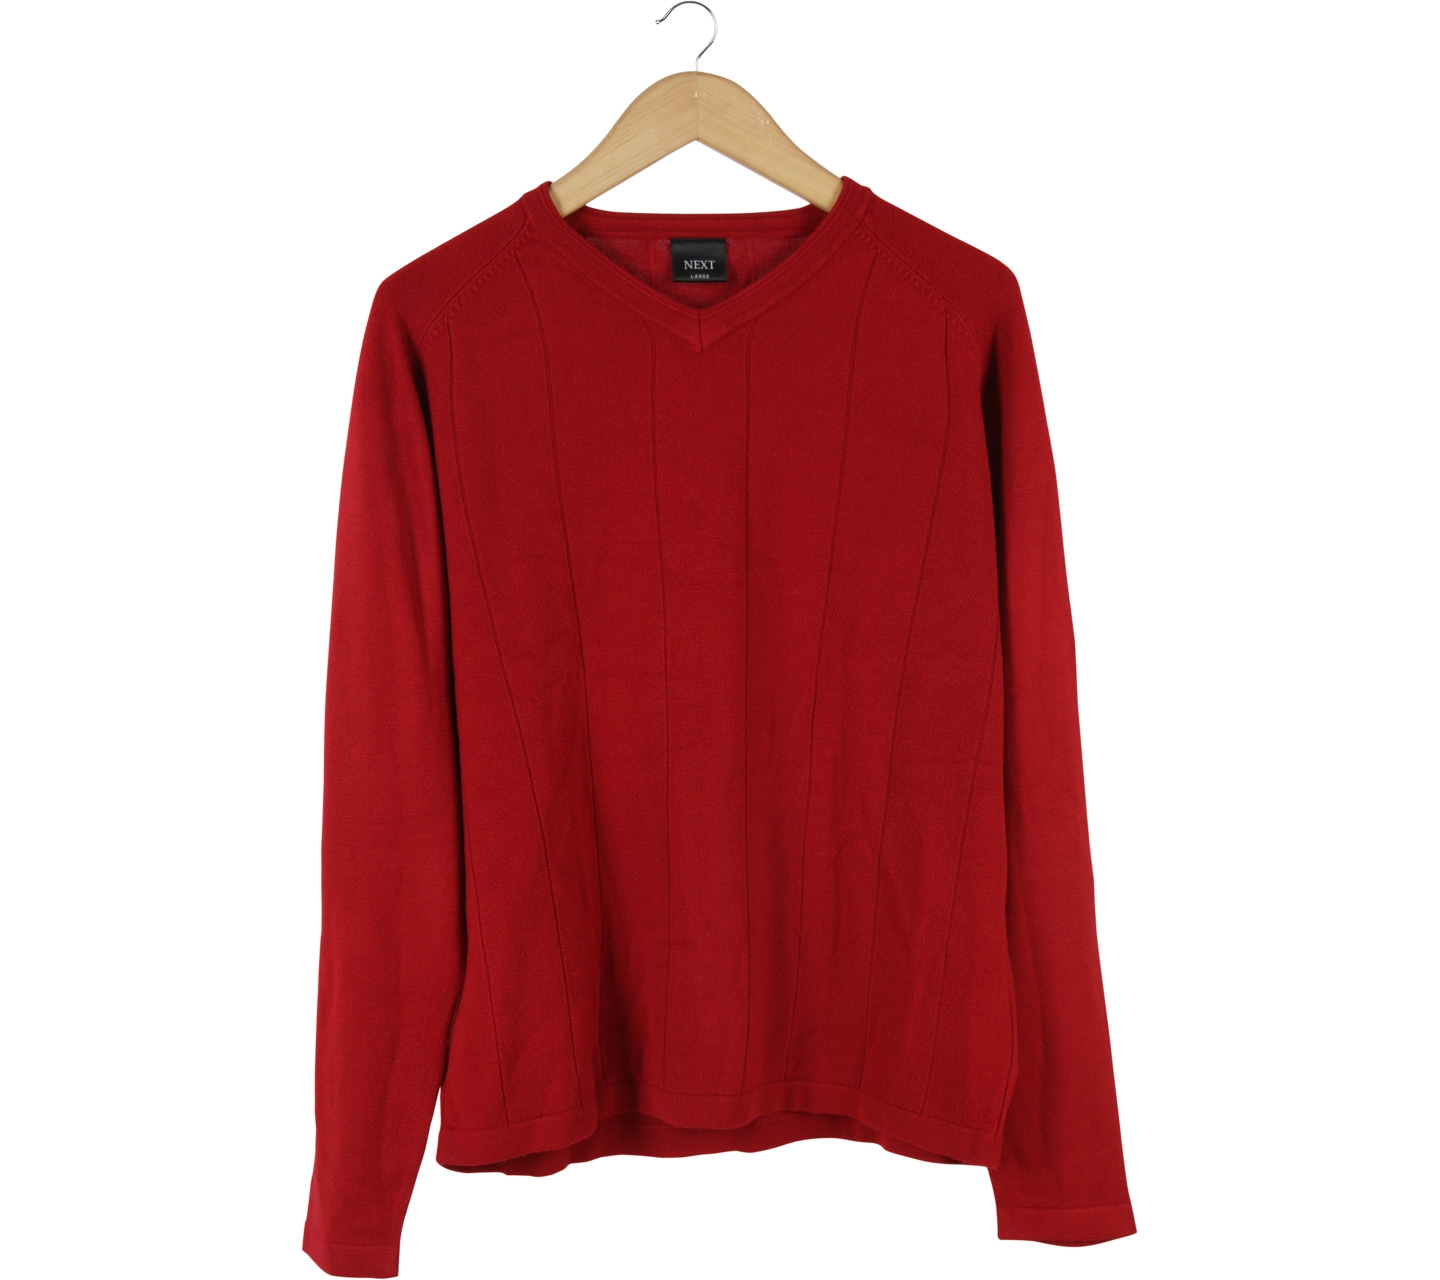 Next Red Knit Sweater